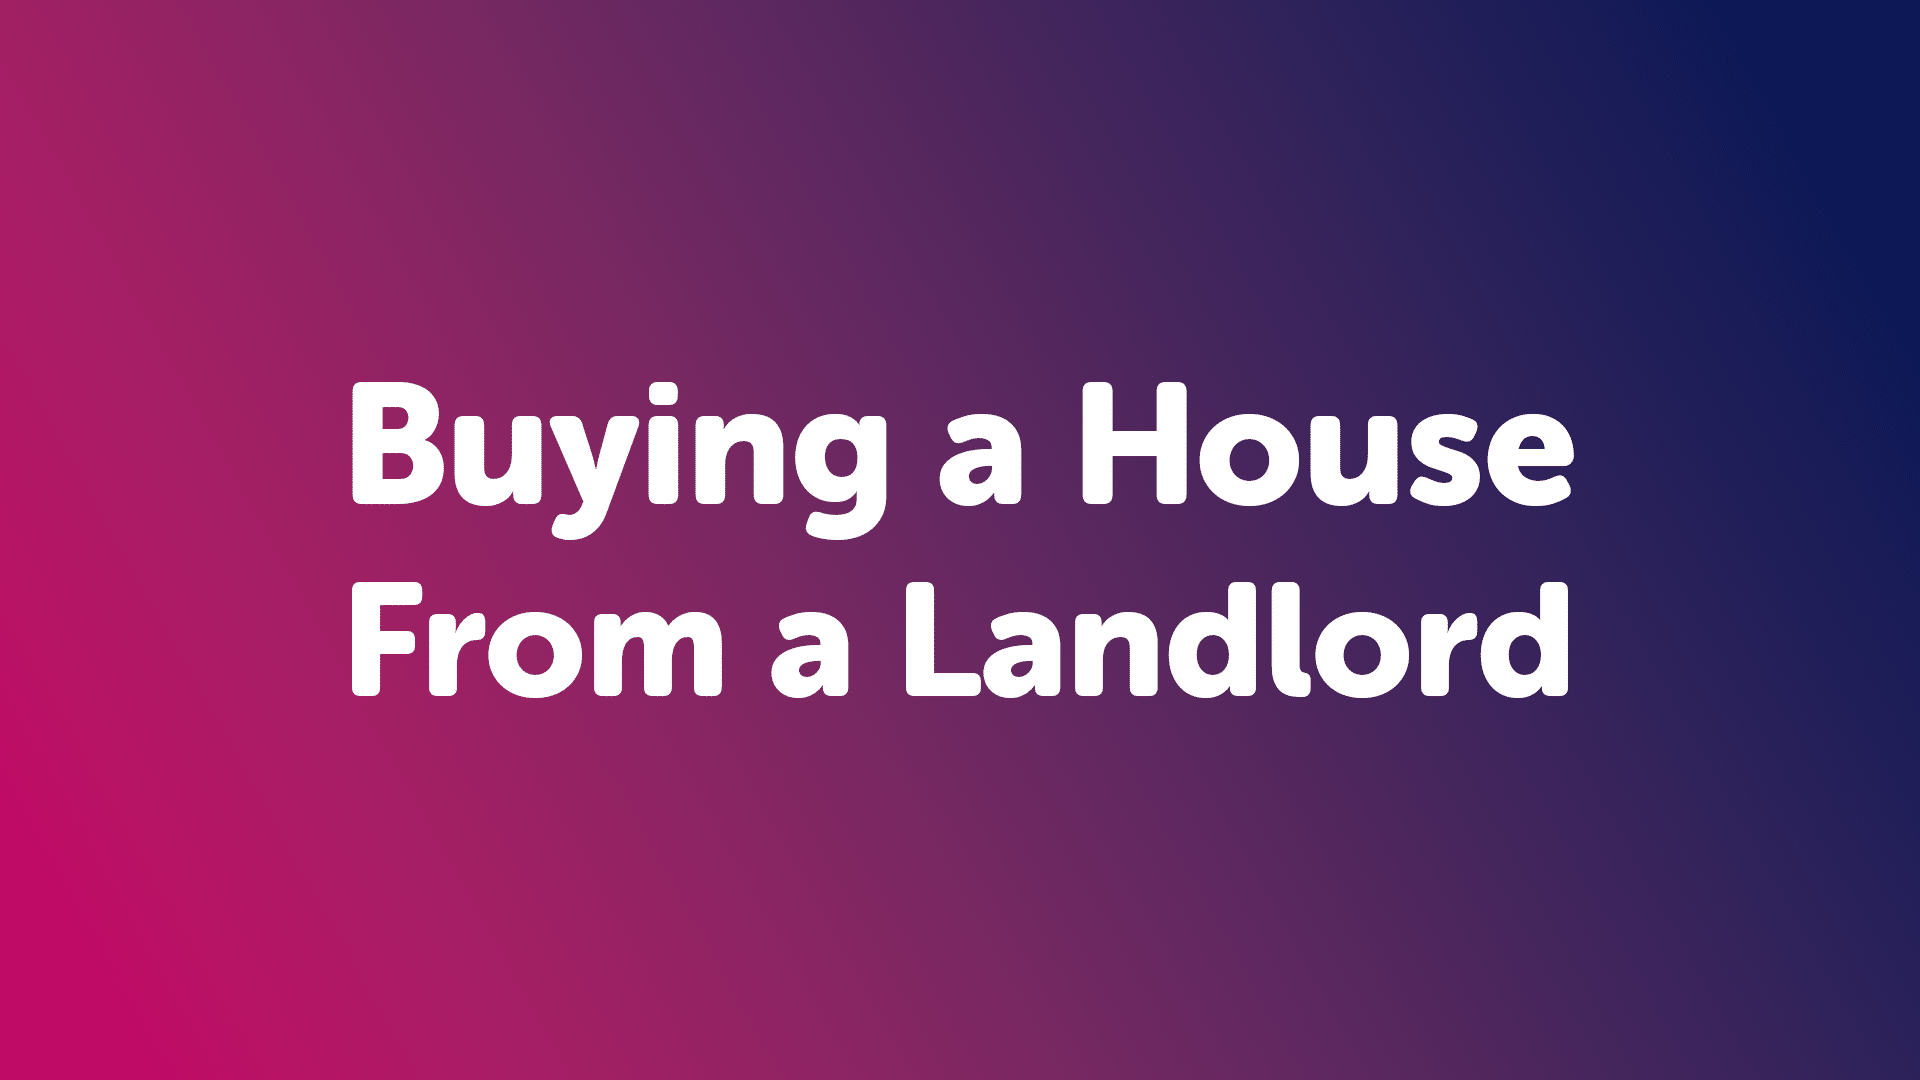 Buying a House From a Landlord in Grimsby